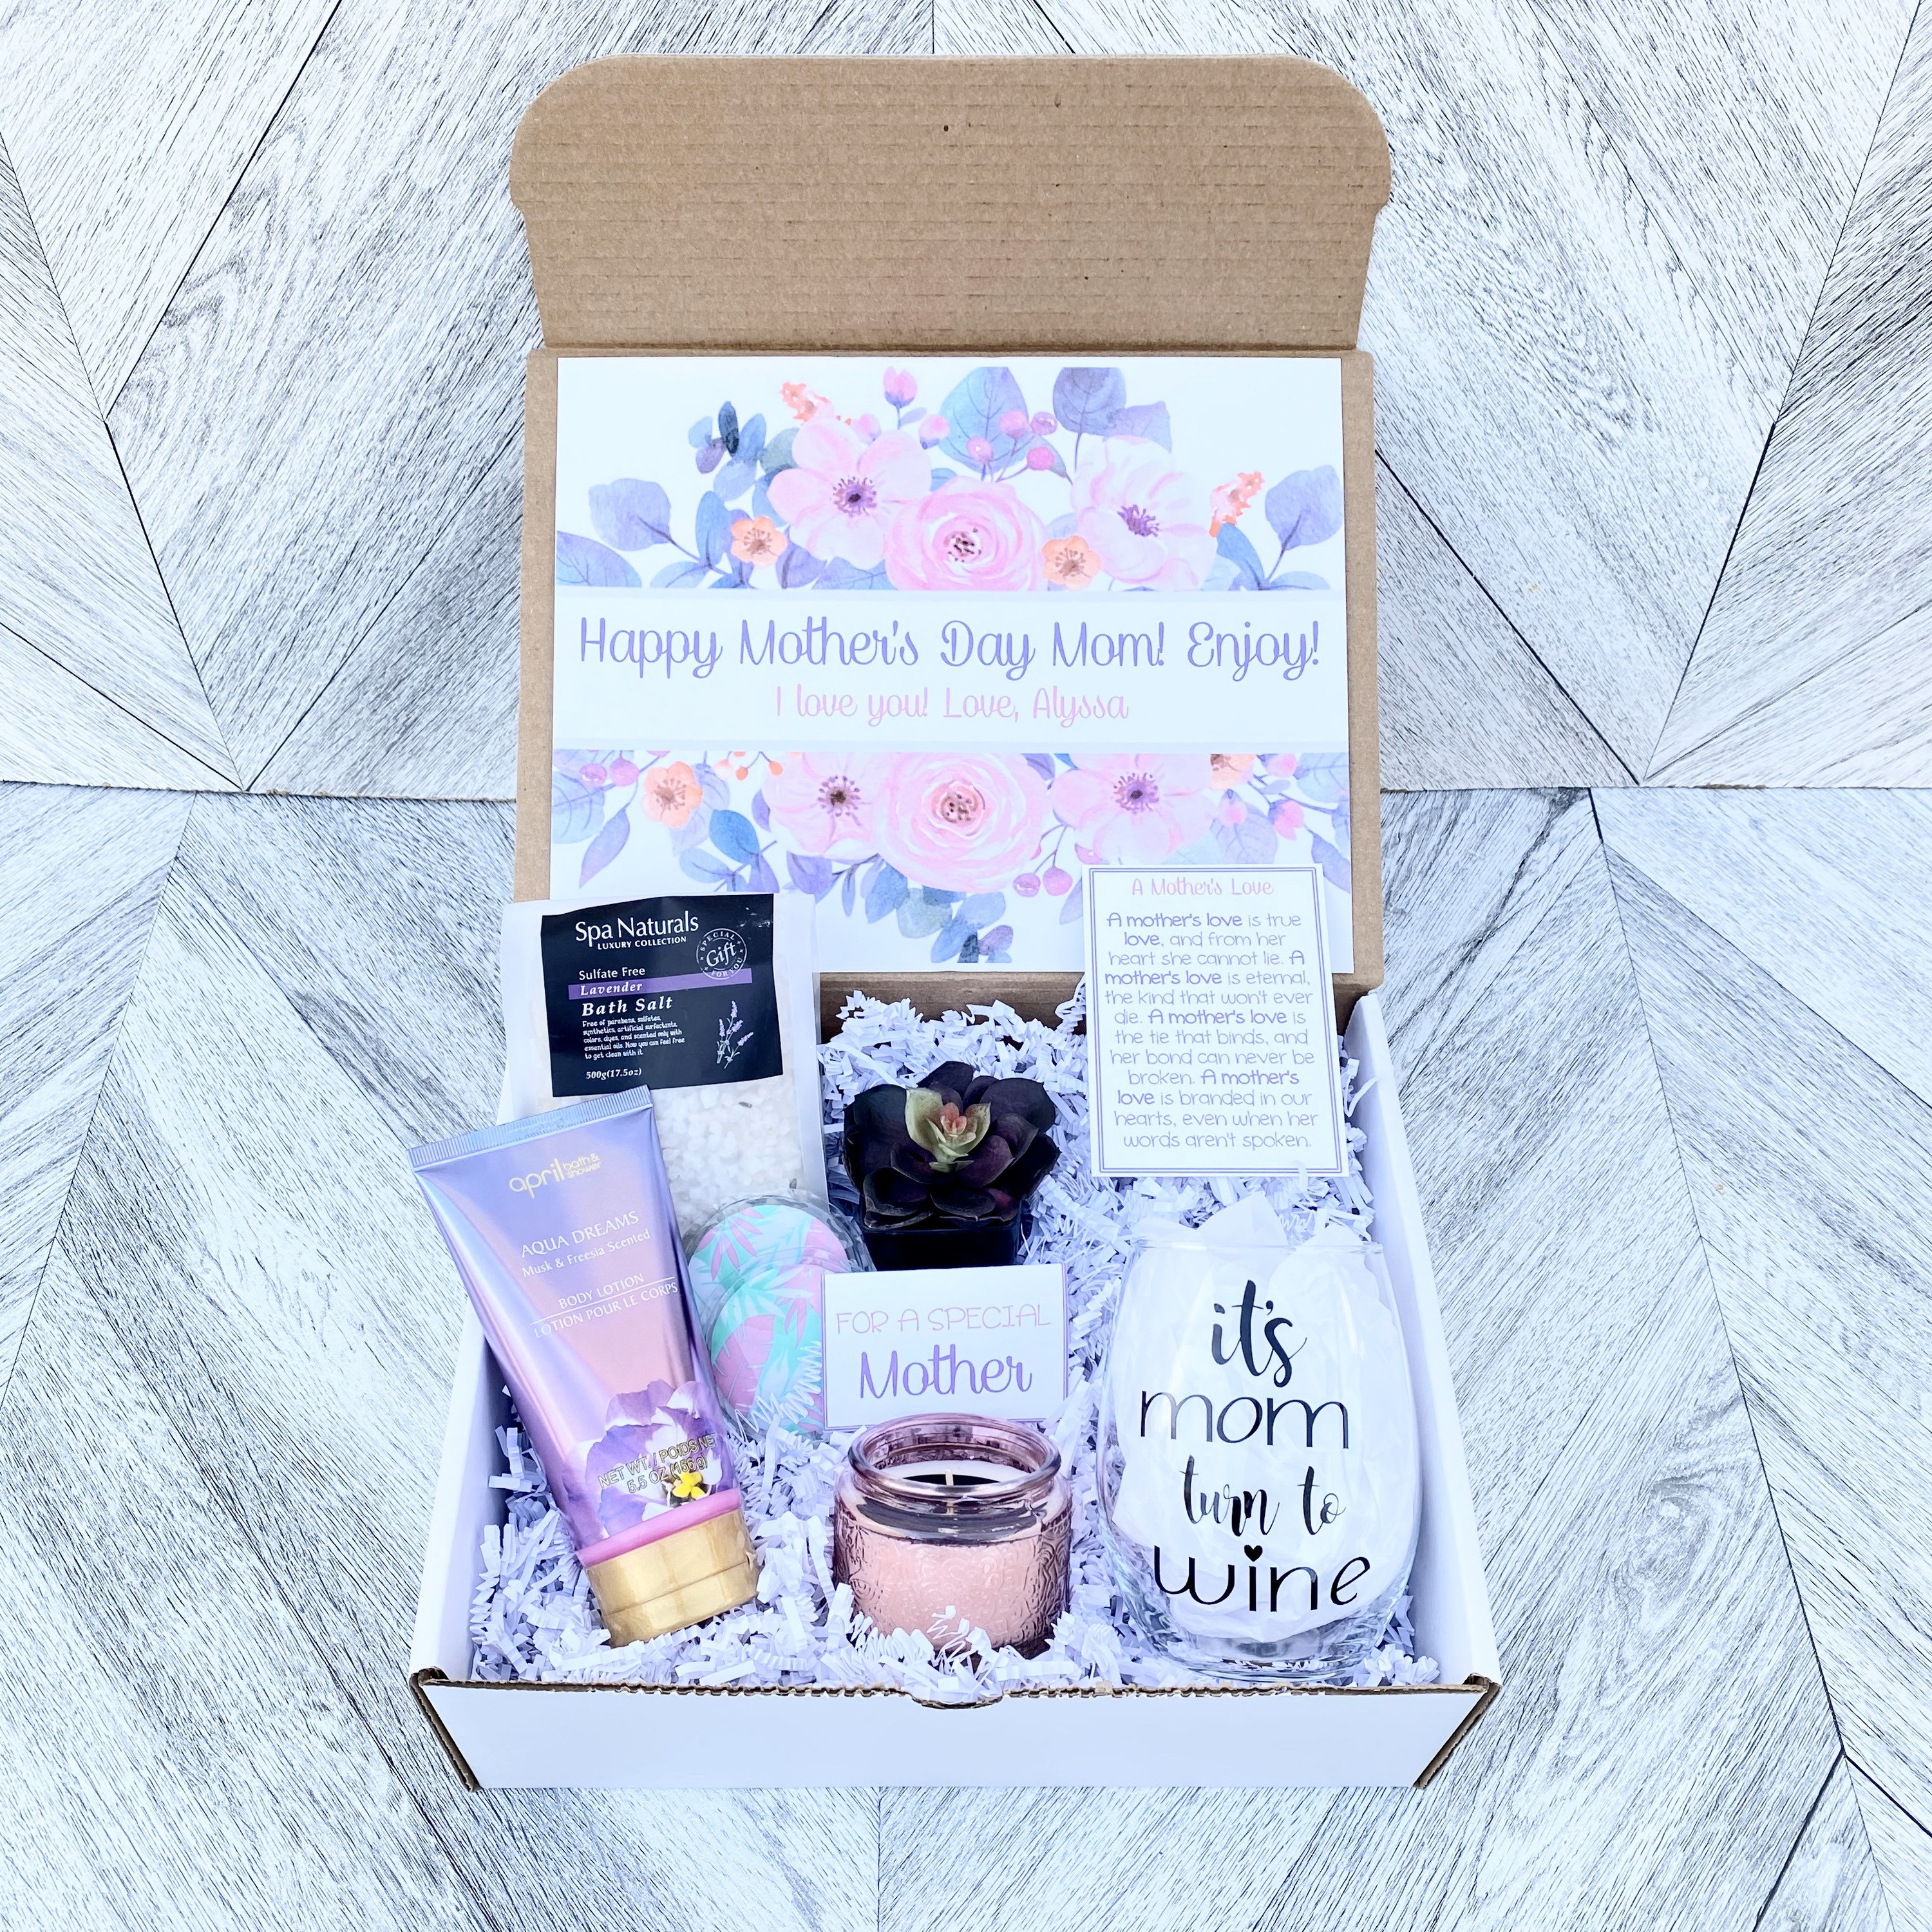 Mother's Day Gift - Mom Spa Gift Set - Pamper Yourself Spa gift box Set